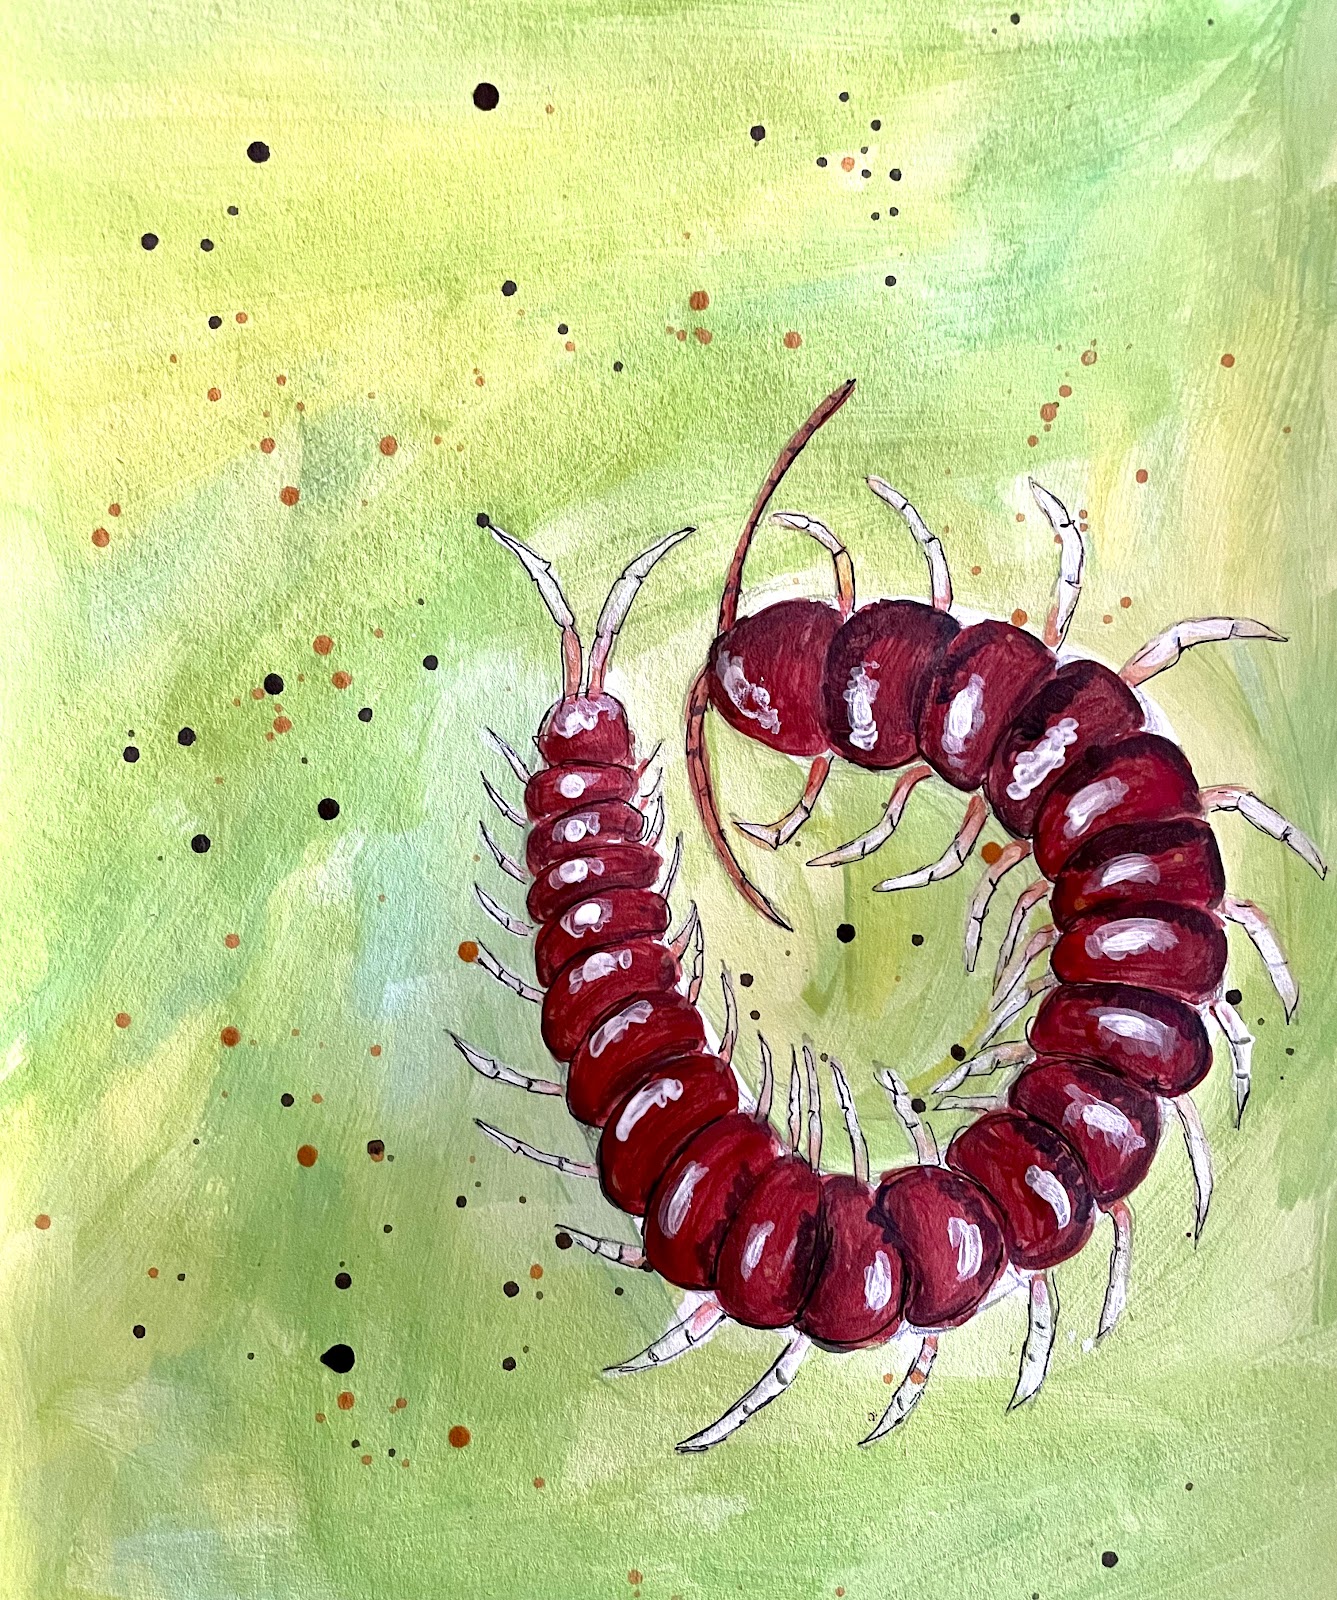 Featured image for “Centipede Painting”